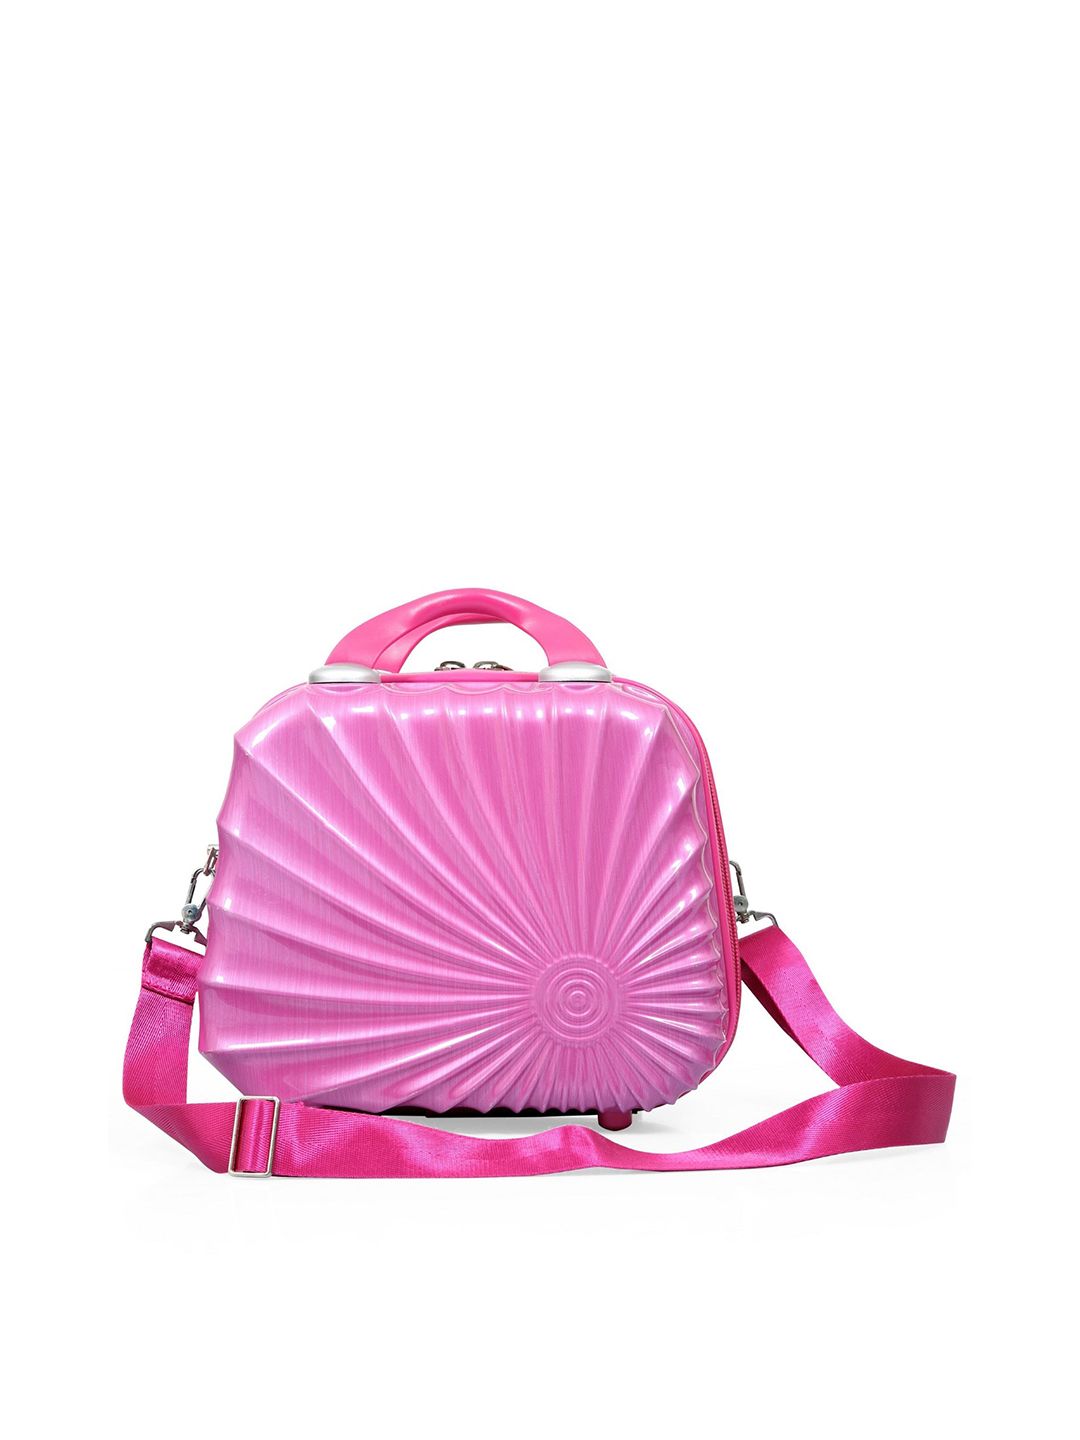 Polo Class Pink Hard-Sided Vanity Bag Price in India